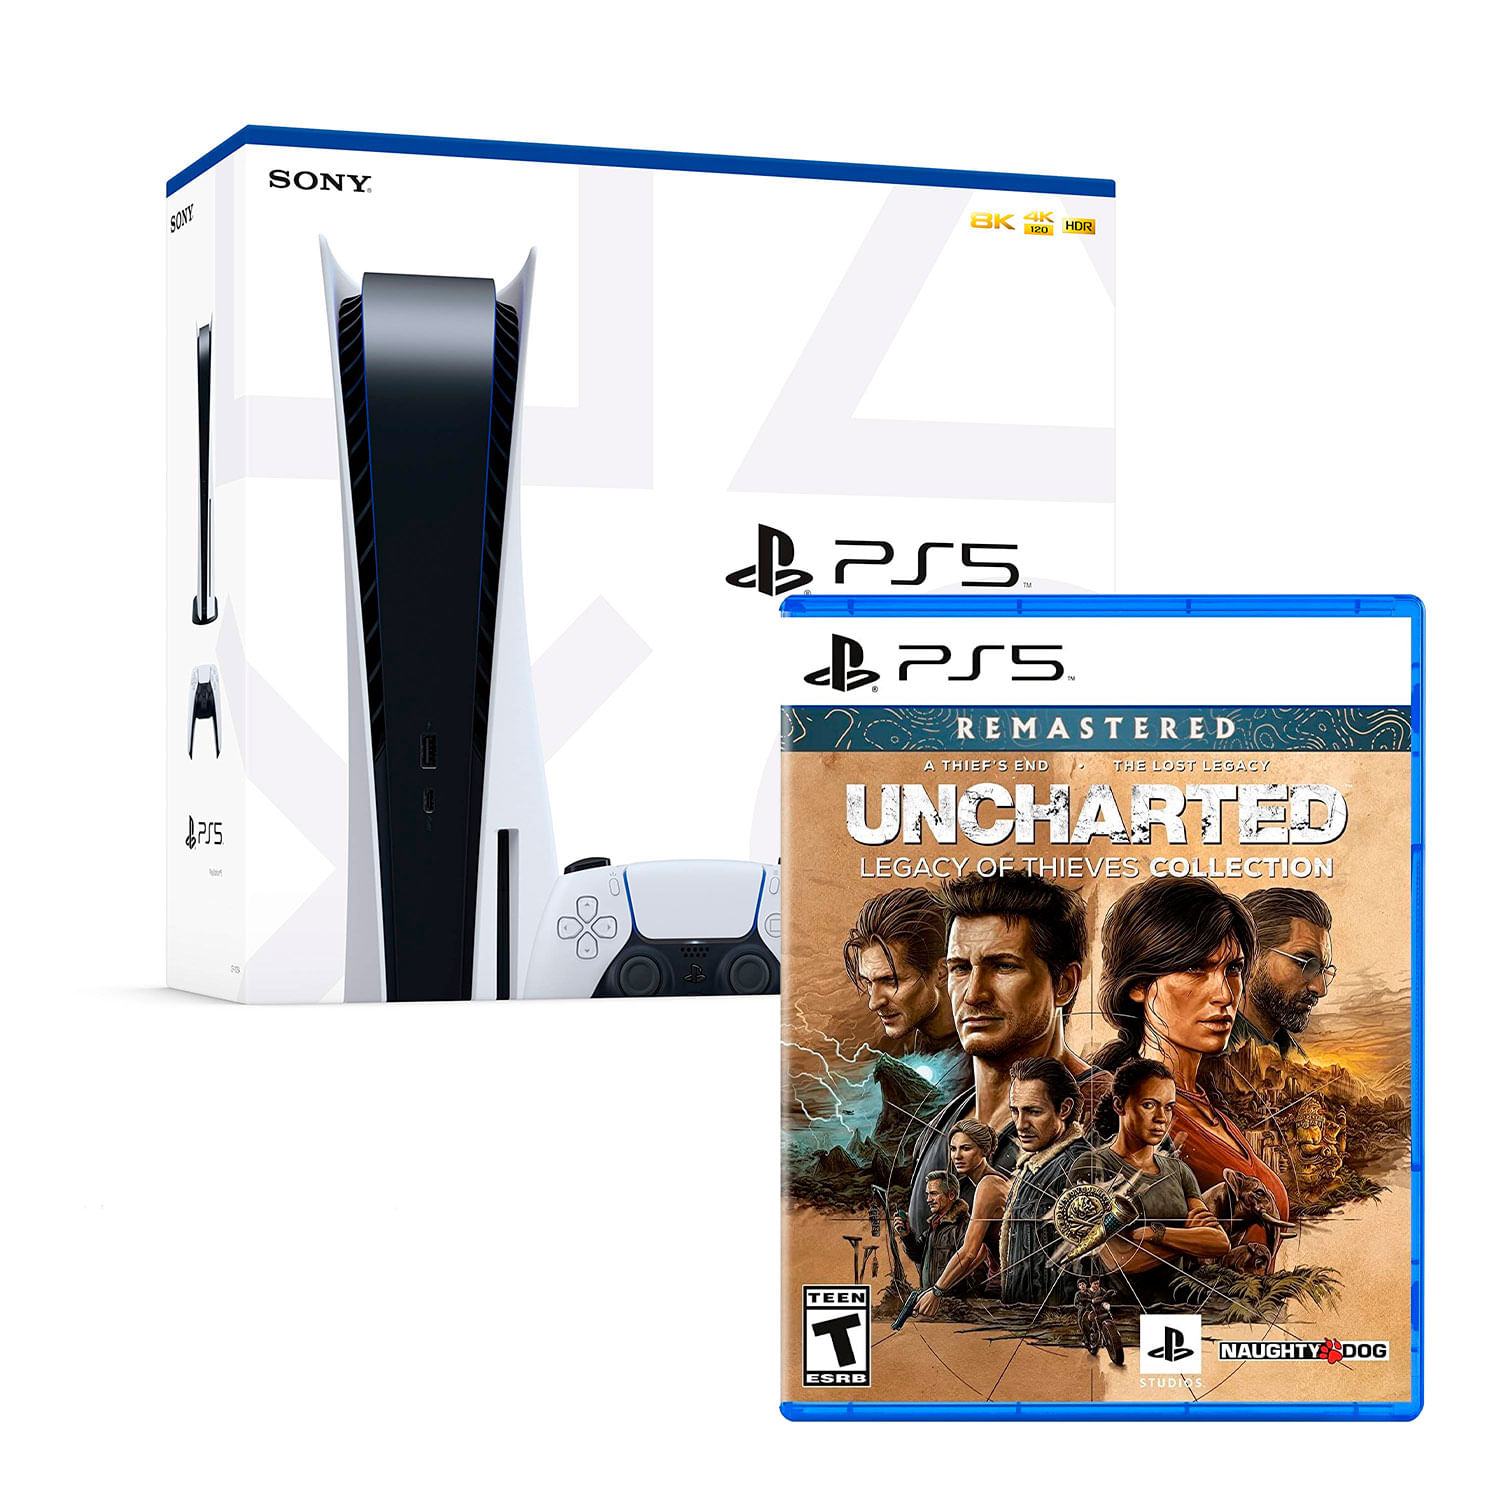 Consola PS5 Con Lector de Discos + Uncharted Legacy of Thieves Collection